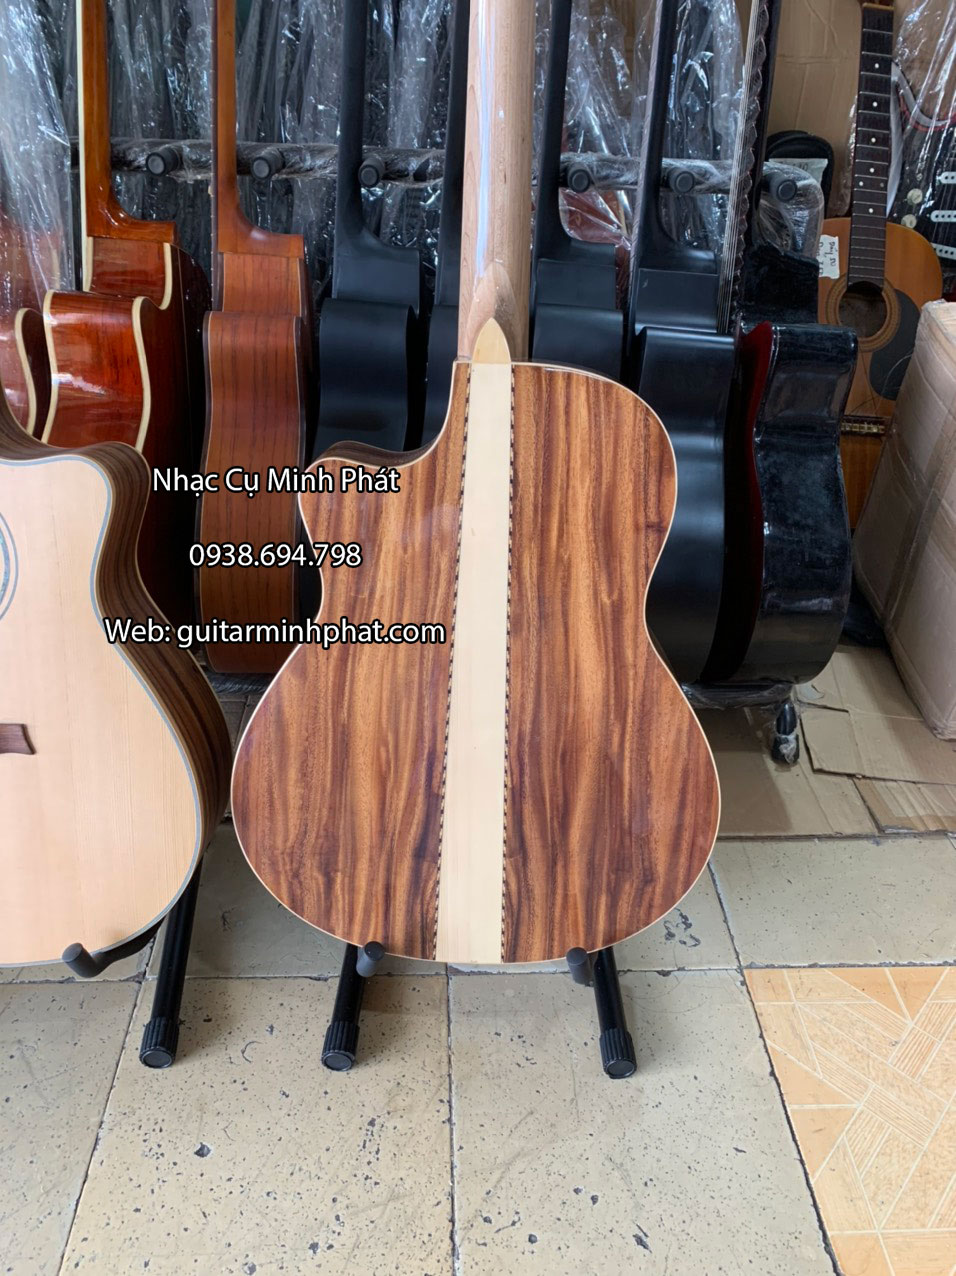 guitar-acoustic-diep-ky-all-solid-gia-cong-tot (4)